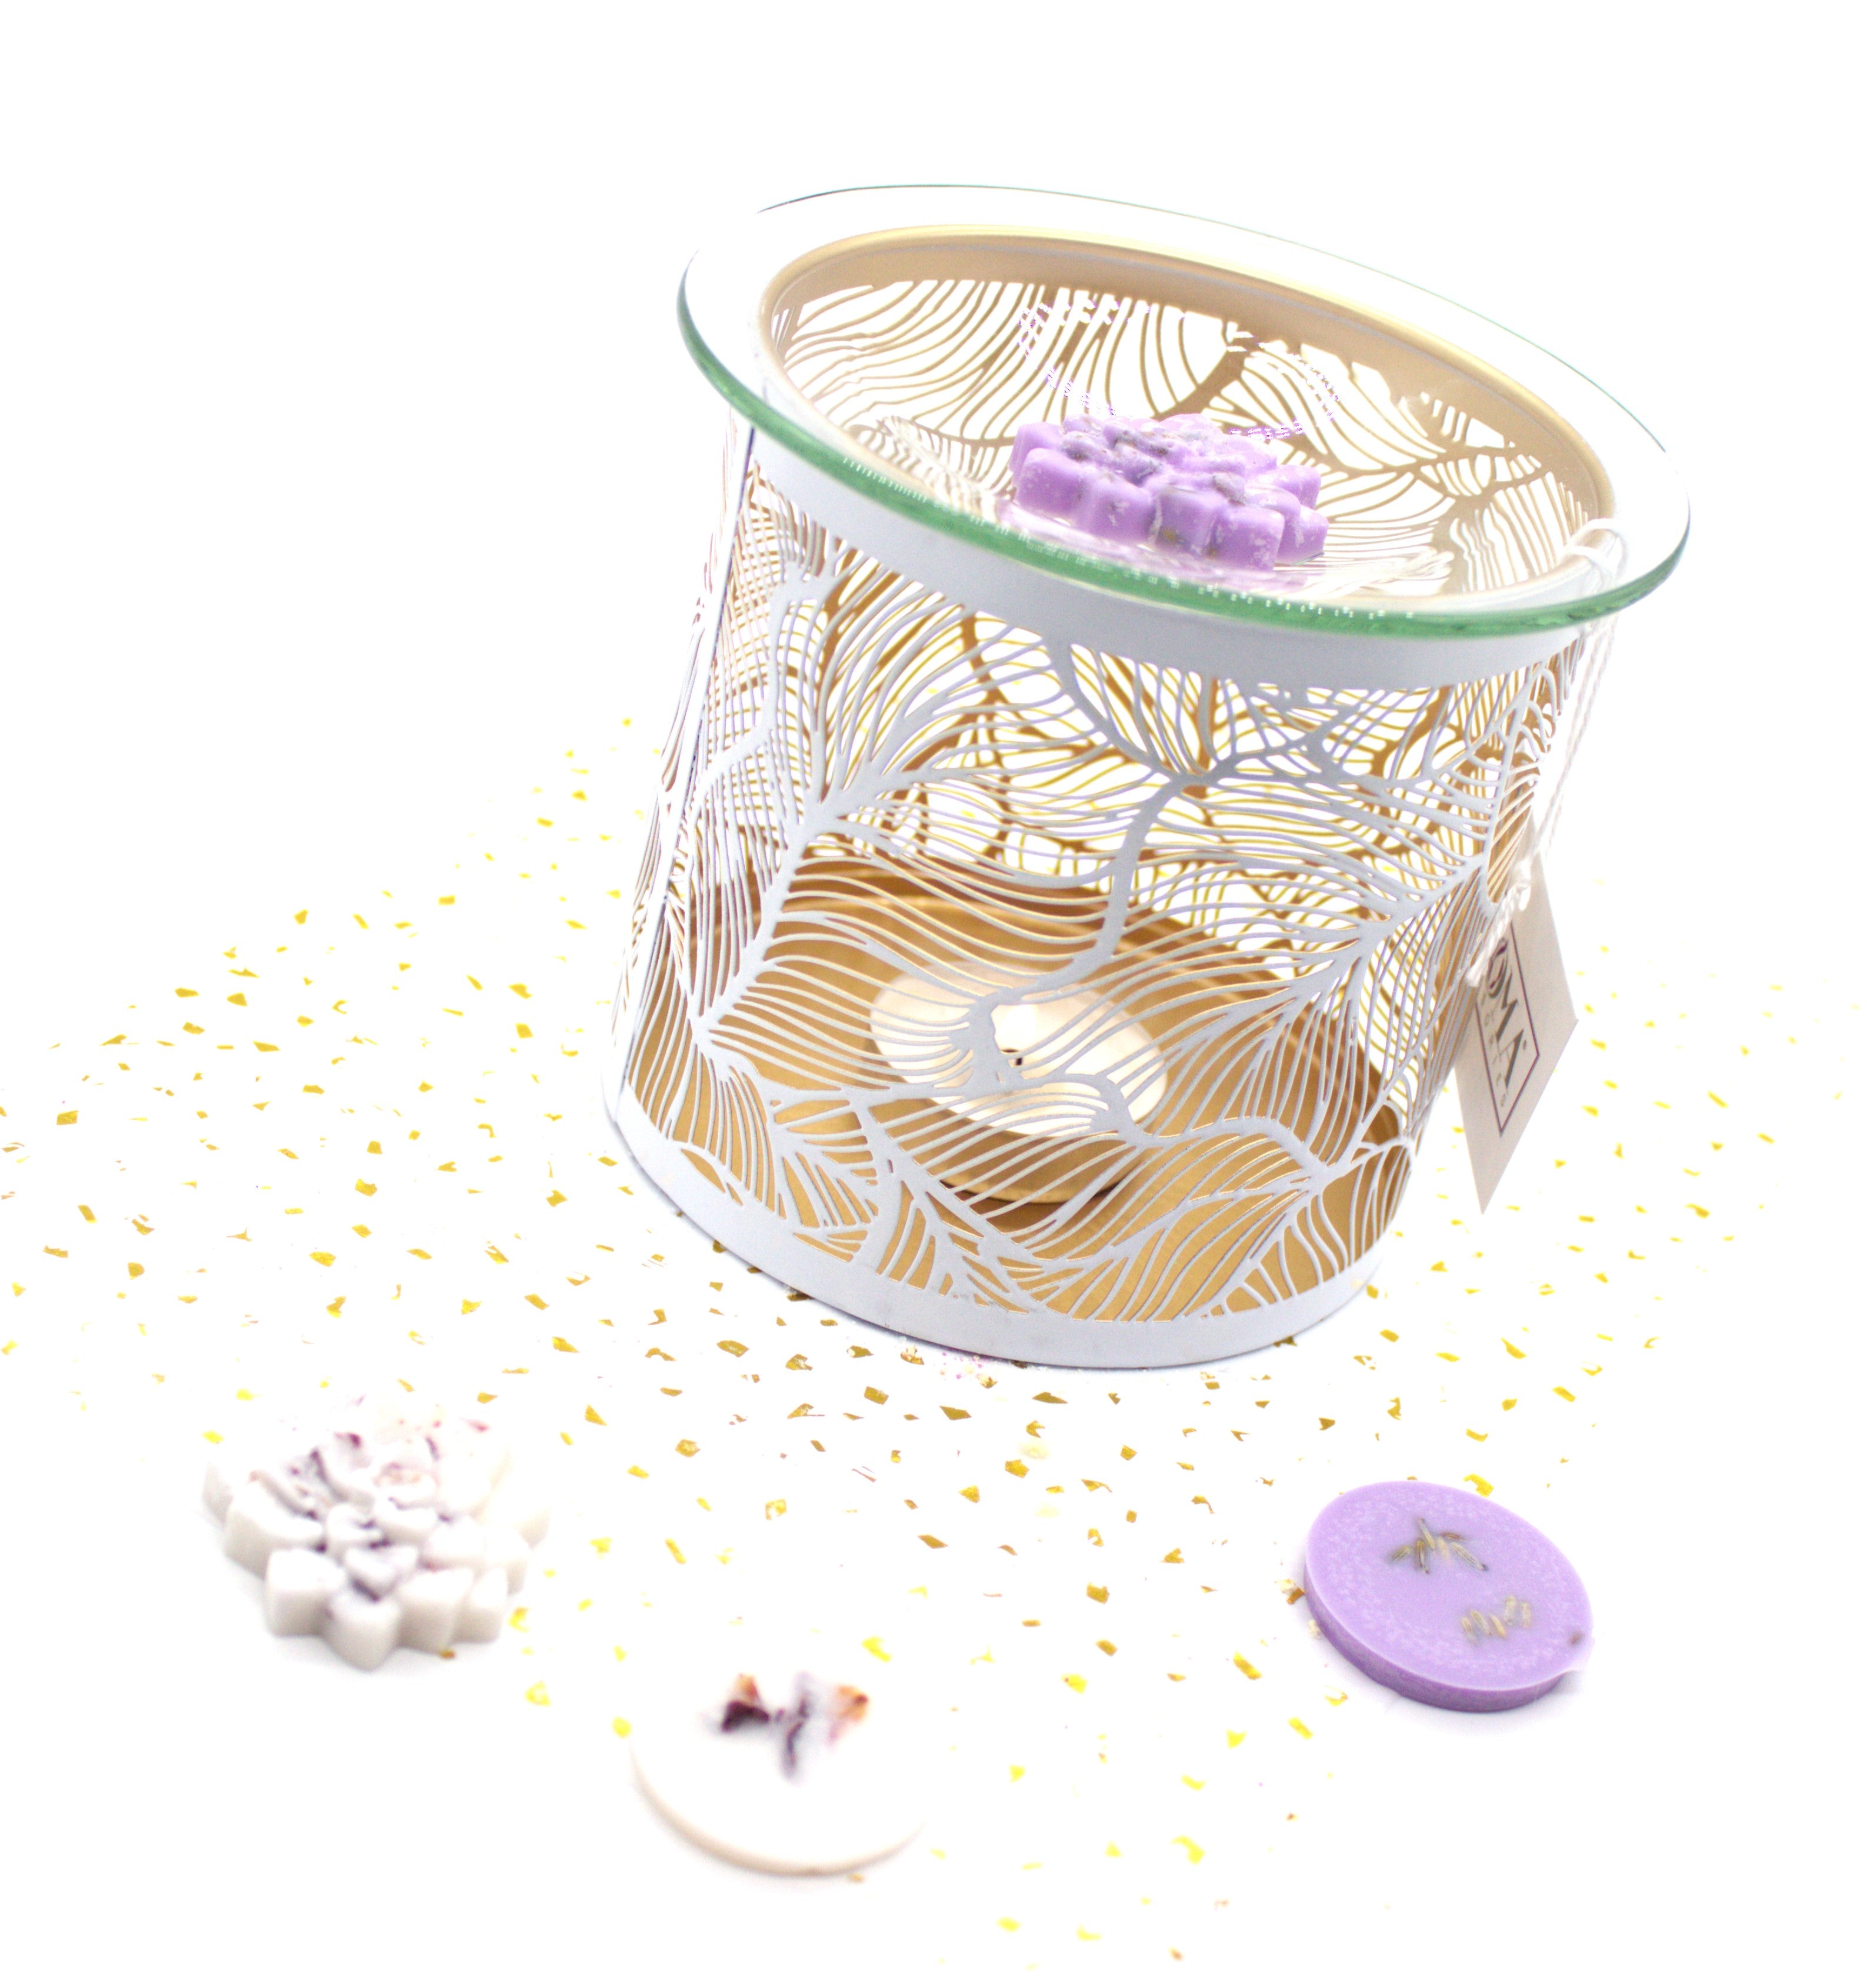 Botanic Design Oil/Wax Melter with Sleep Well Soy Wax Melts